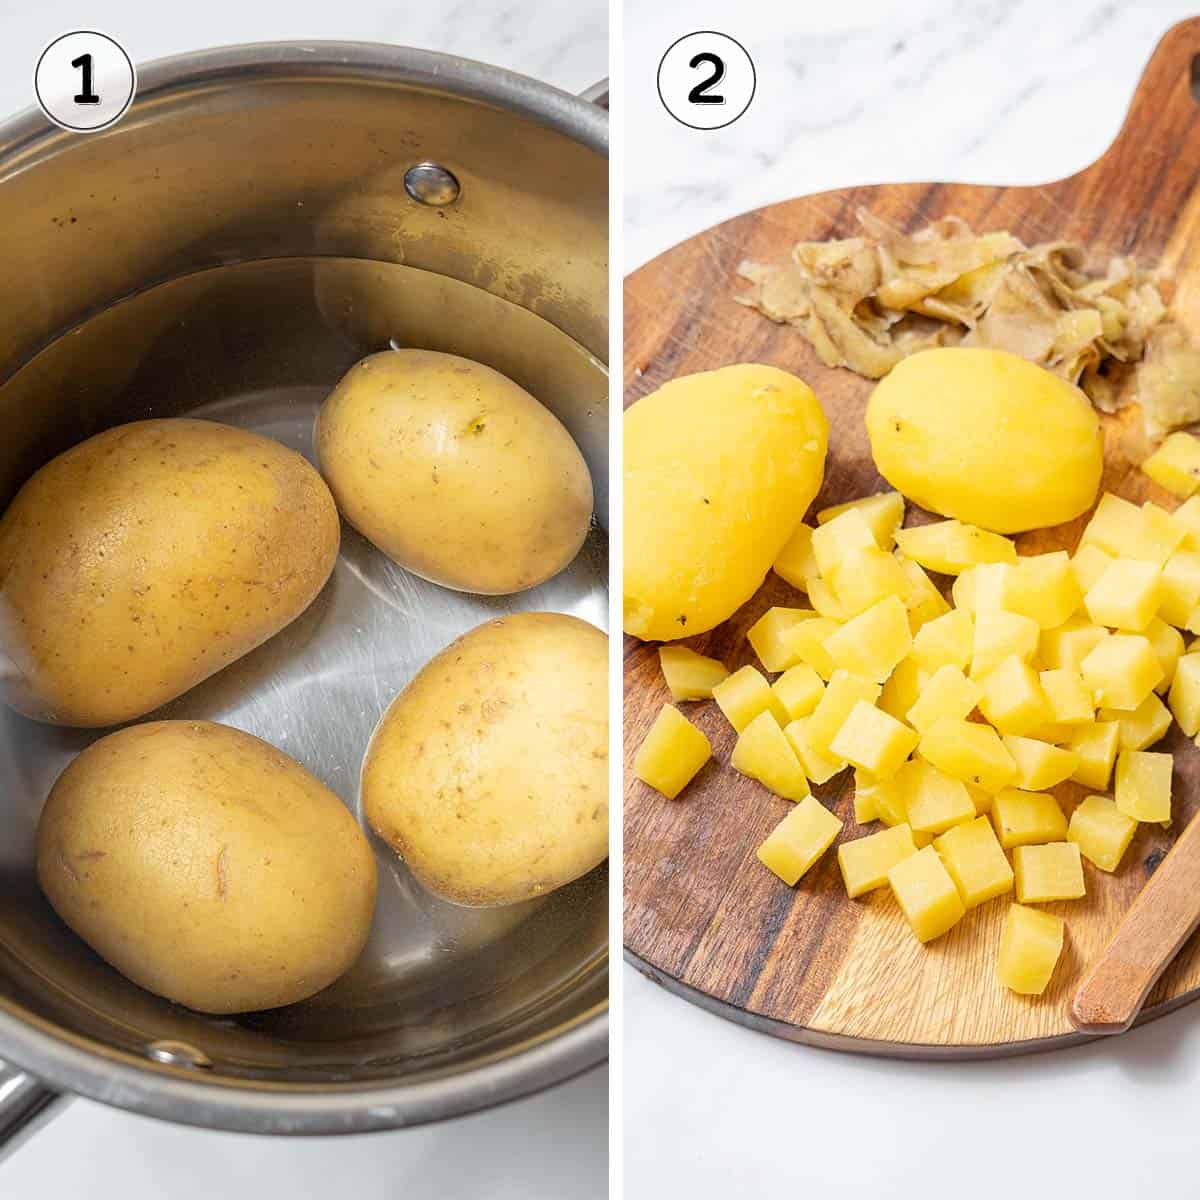 boiling, peeling, and cubing the potatoes.